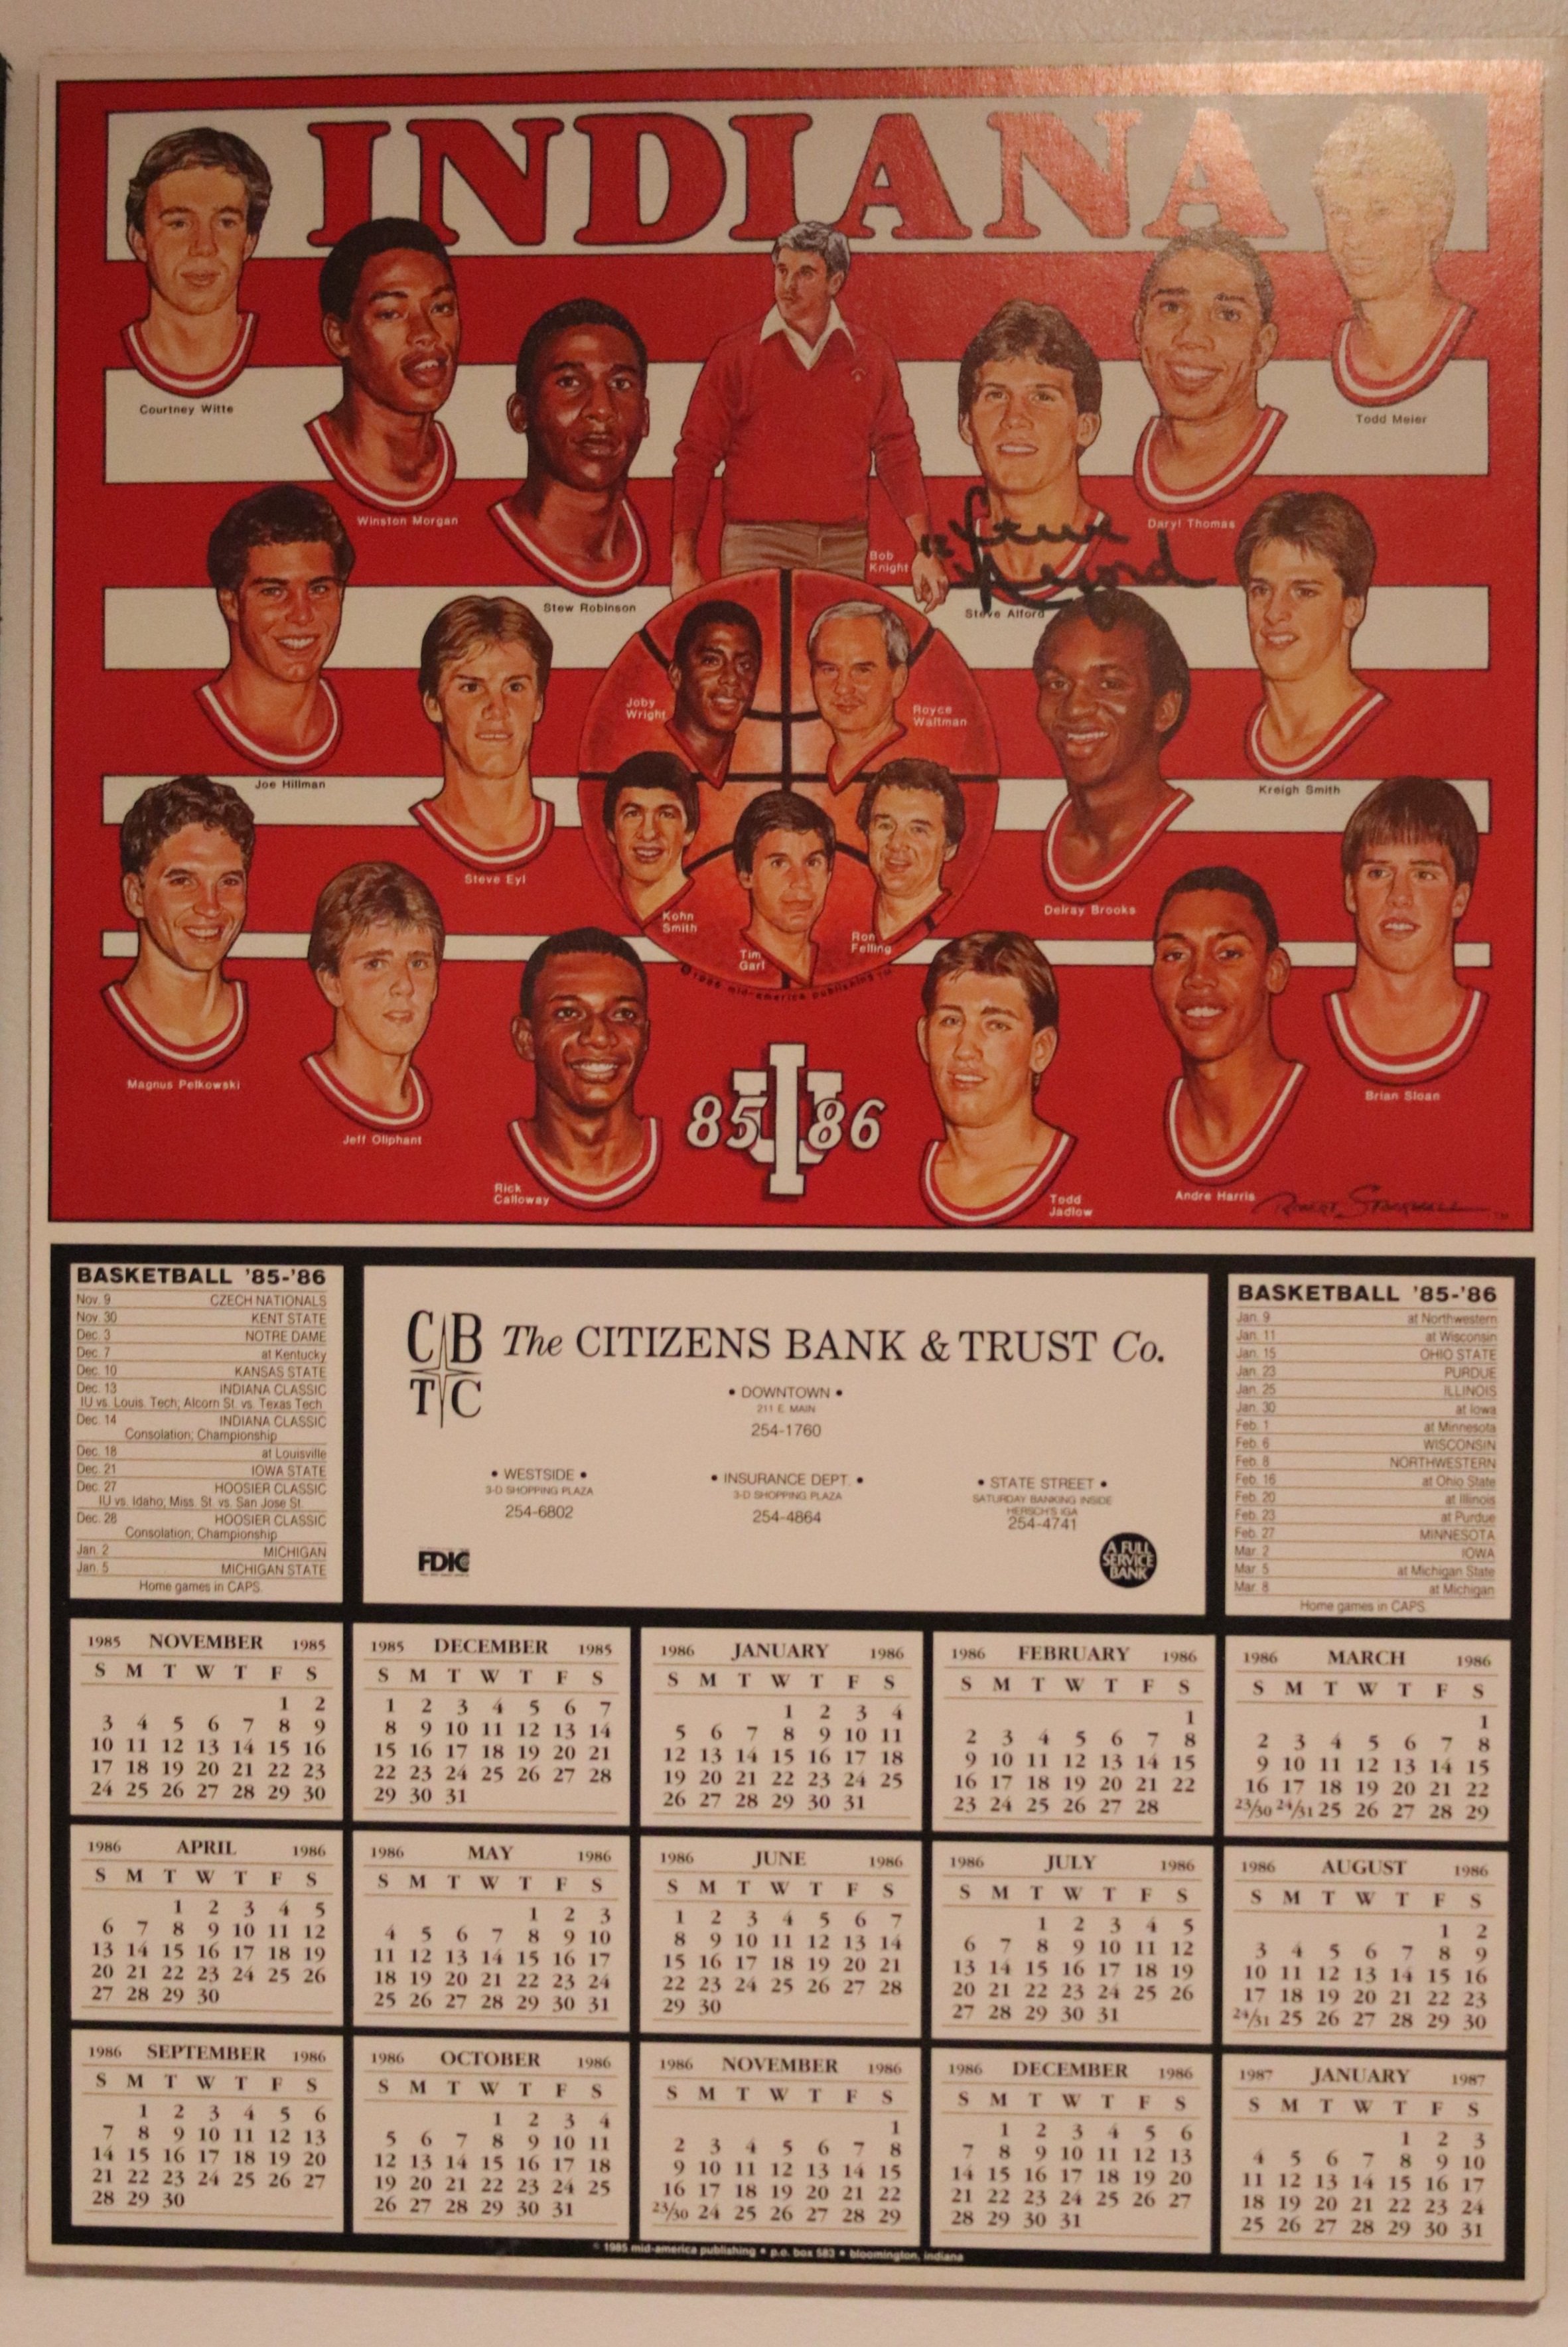 Indiana Hoosiers Basketball Annual Schedule/Calendar Posters — The